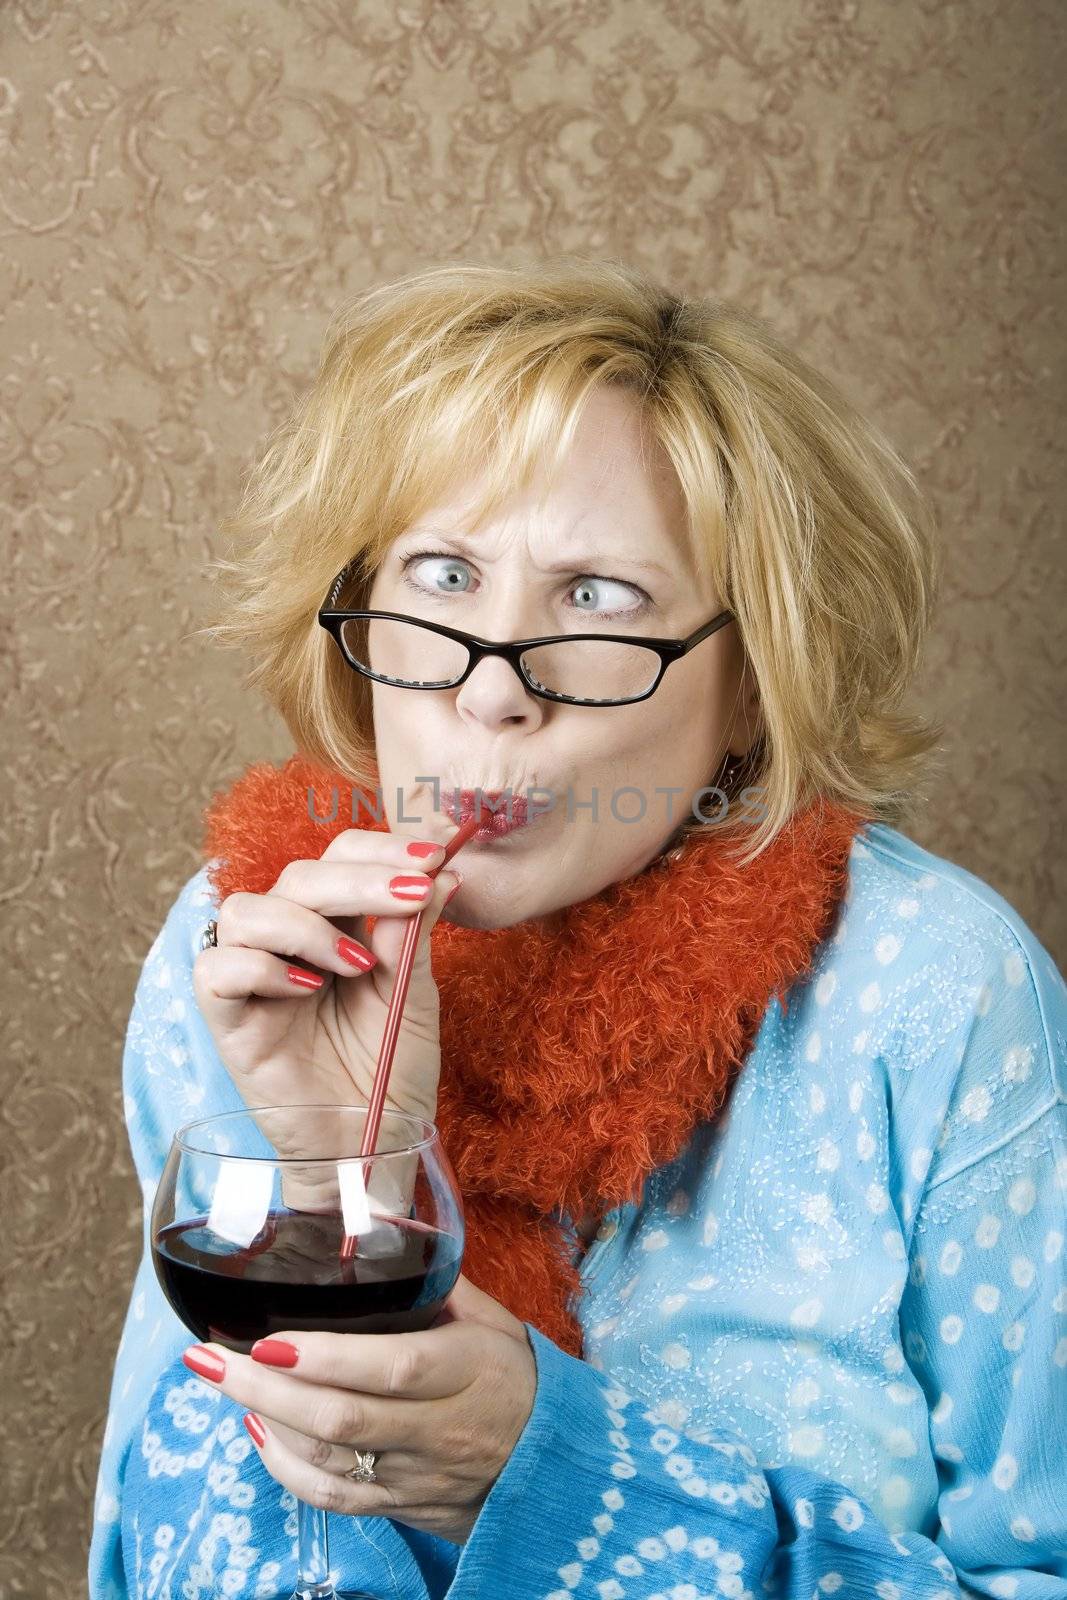 Crazy woman with crossed eyes drinking wine through a straw